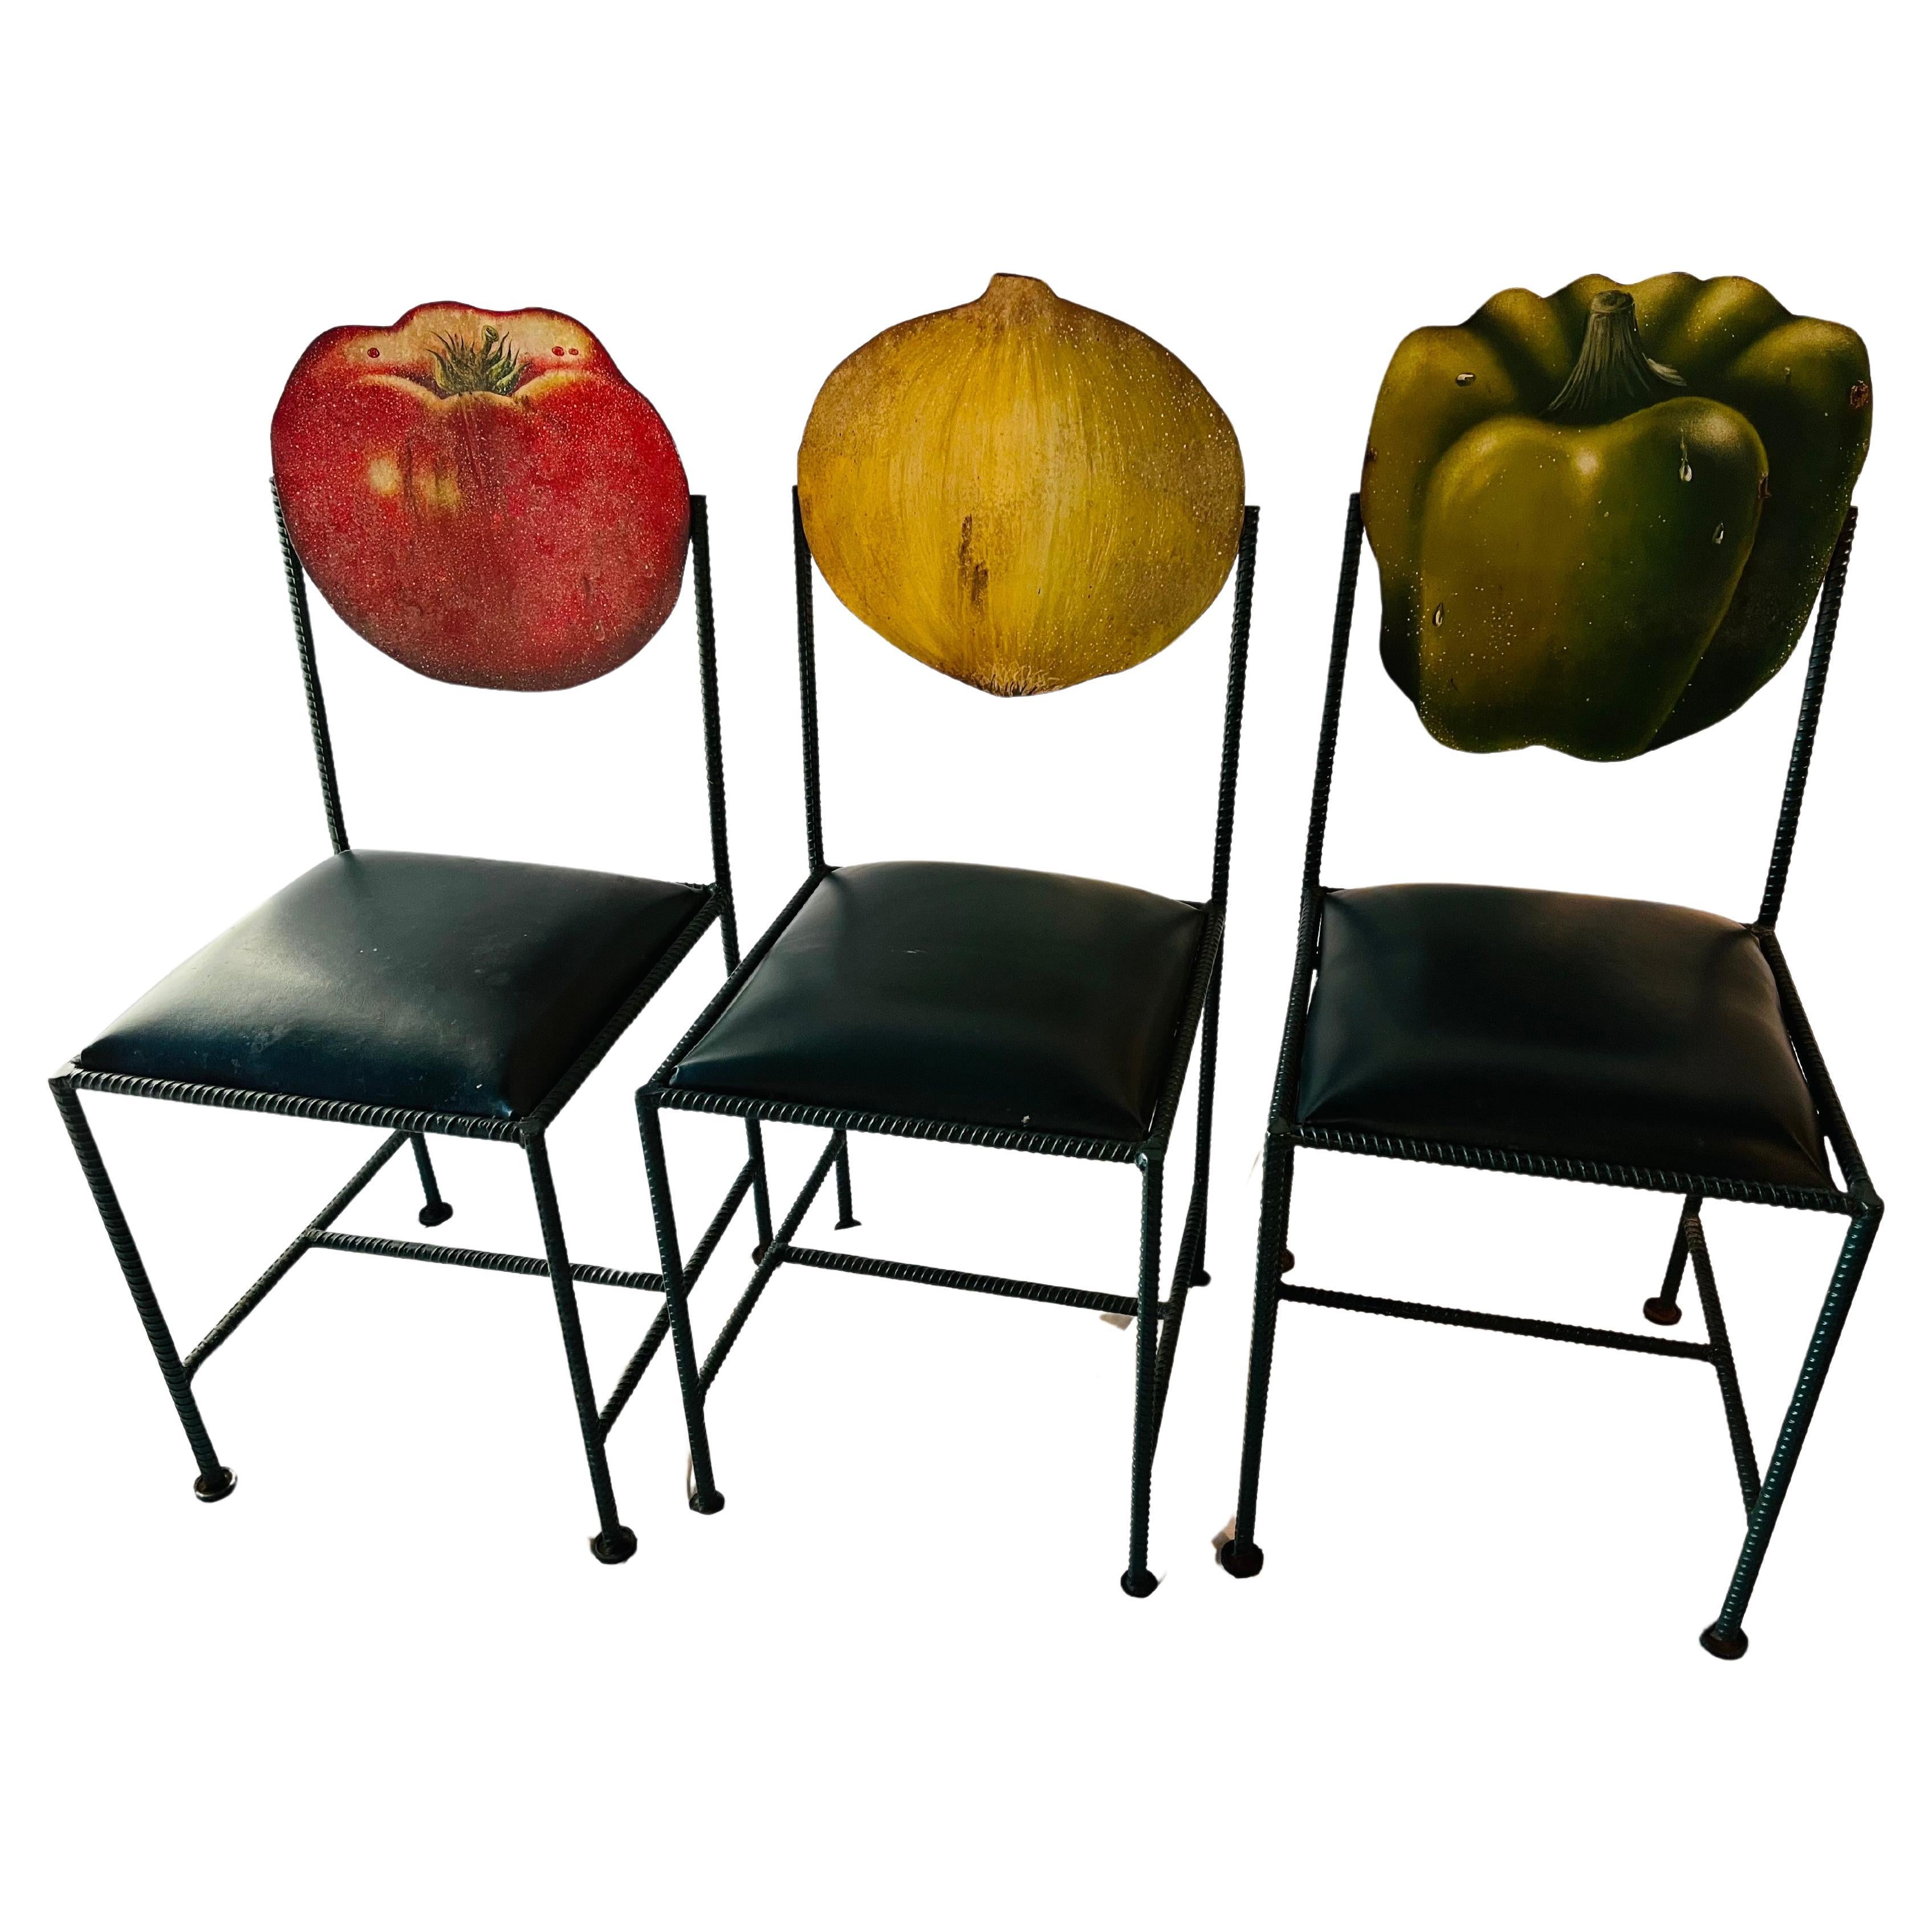 Artist Made Hand Painted and Signed Unique Set of Three Vegetable Garden Chairs For Sale